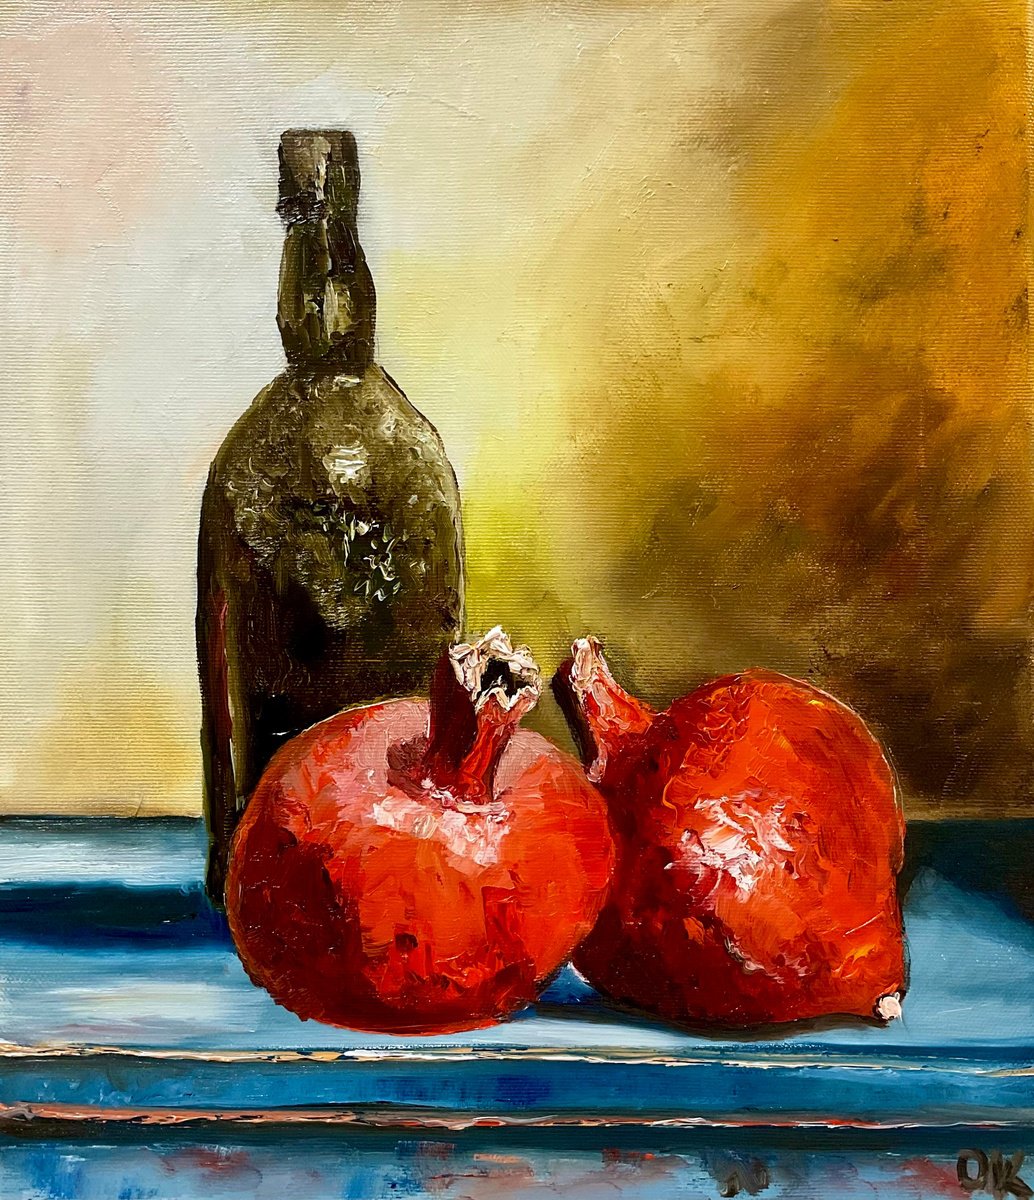 Pomegranates and oil bottle, rustic  style still life. Palette knife painting on linen can... by Olga Koval